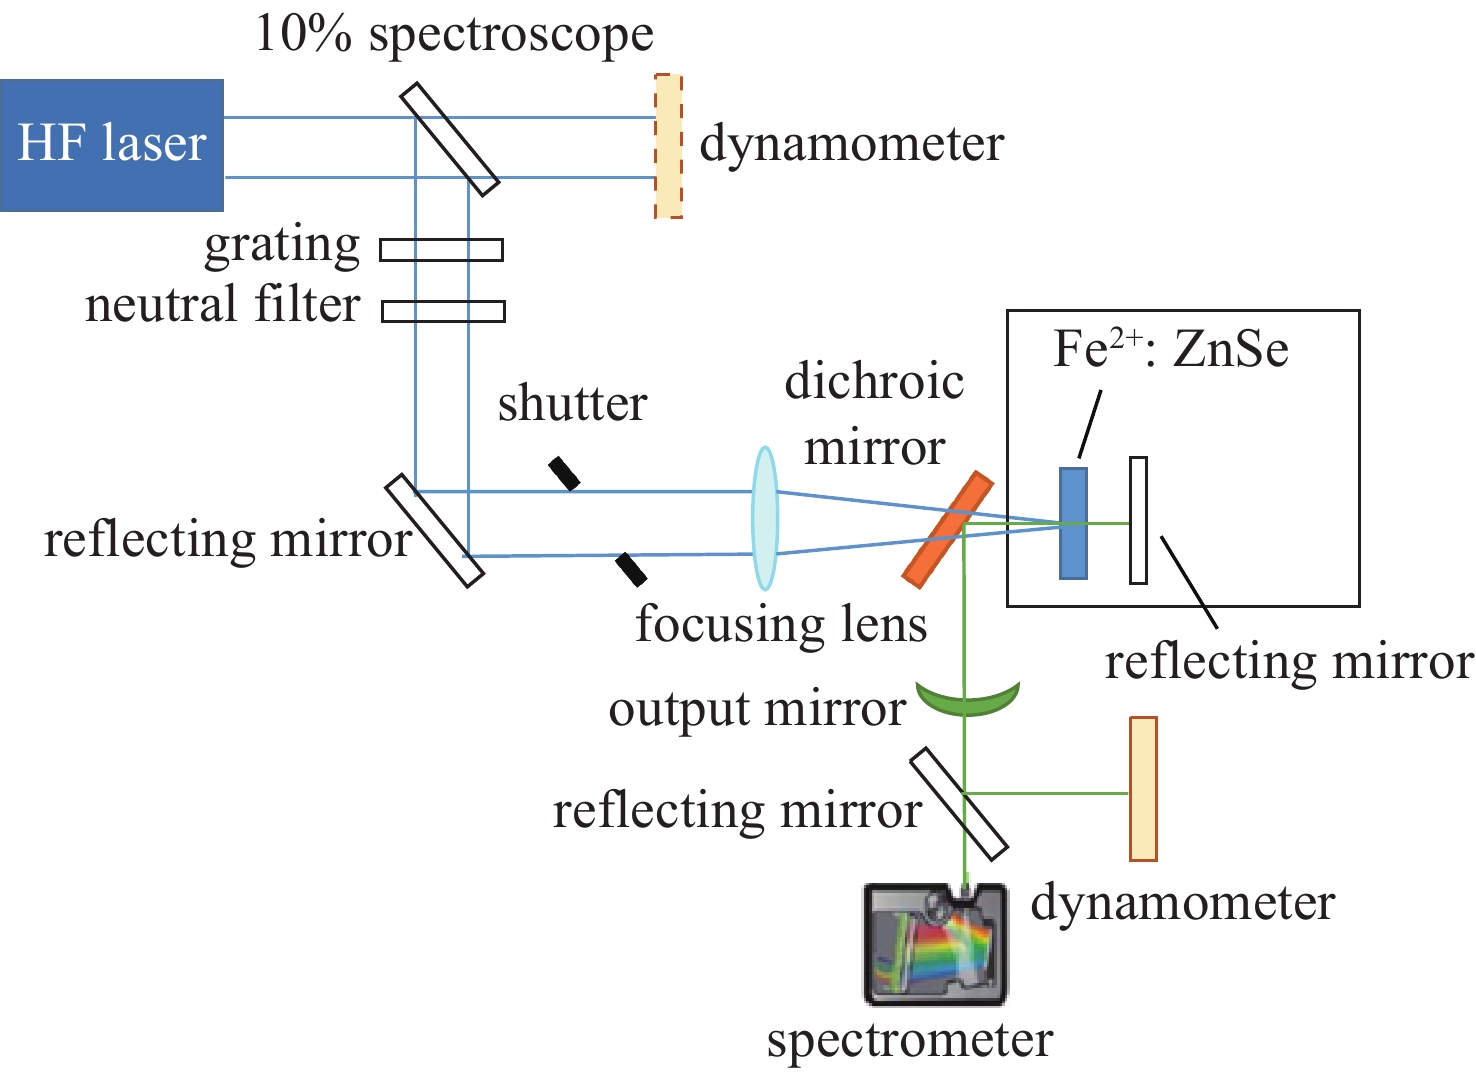 Schematic diagram of continuous wave HF chemical laser pumped Fe2+: ZnSe laser crystal